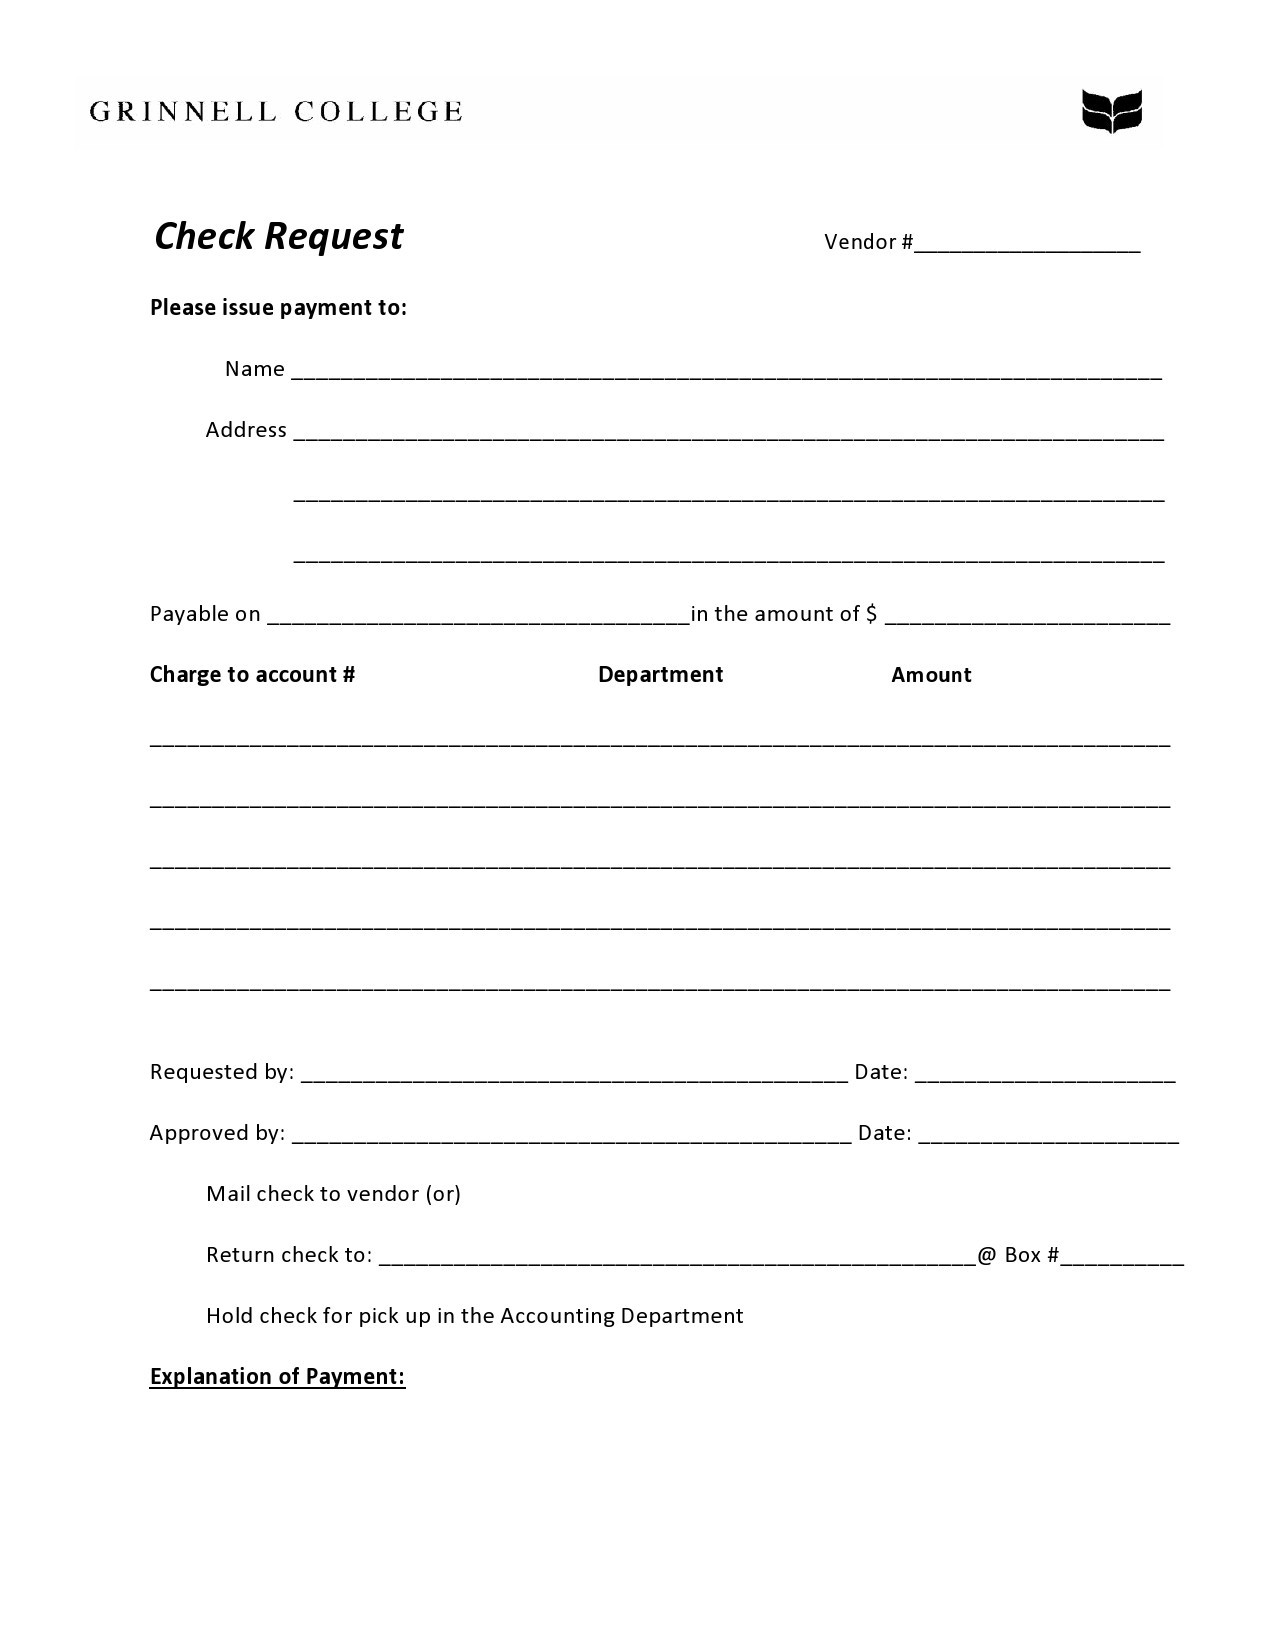 50 Free Check Request Forms Word Excel PDF ᐅ TemplateLab